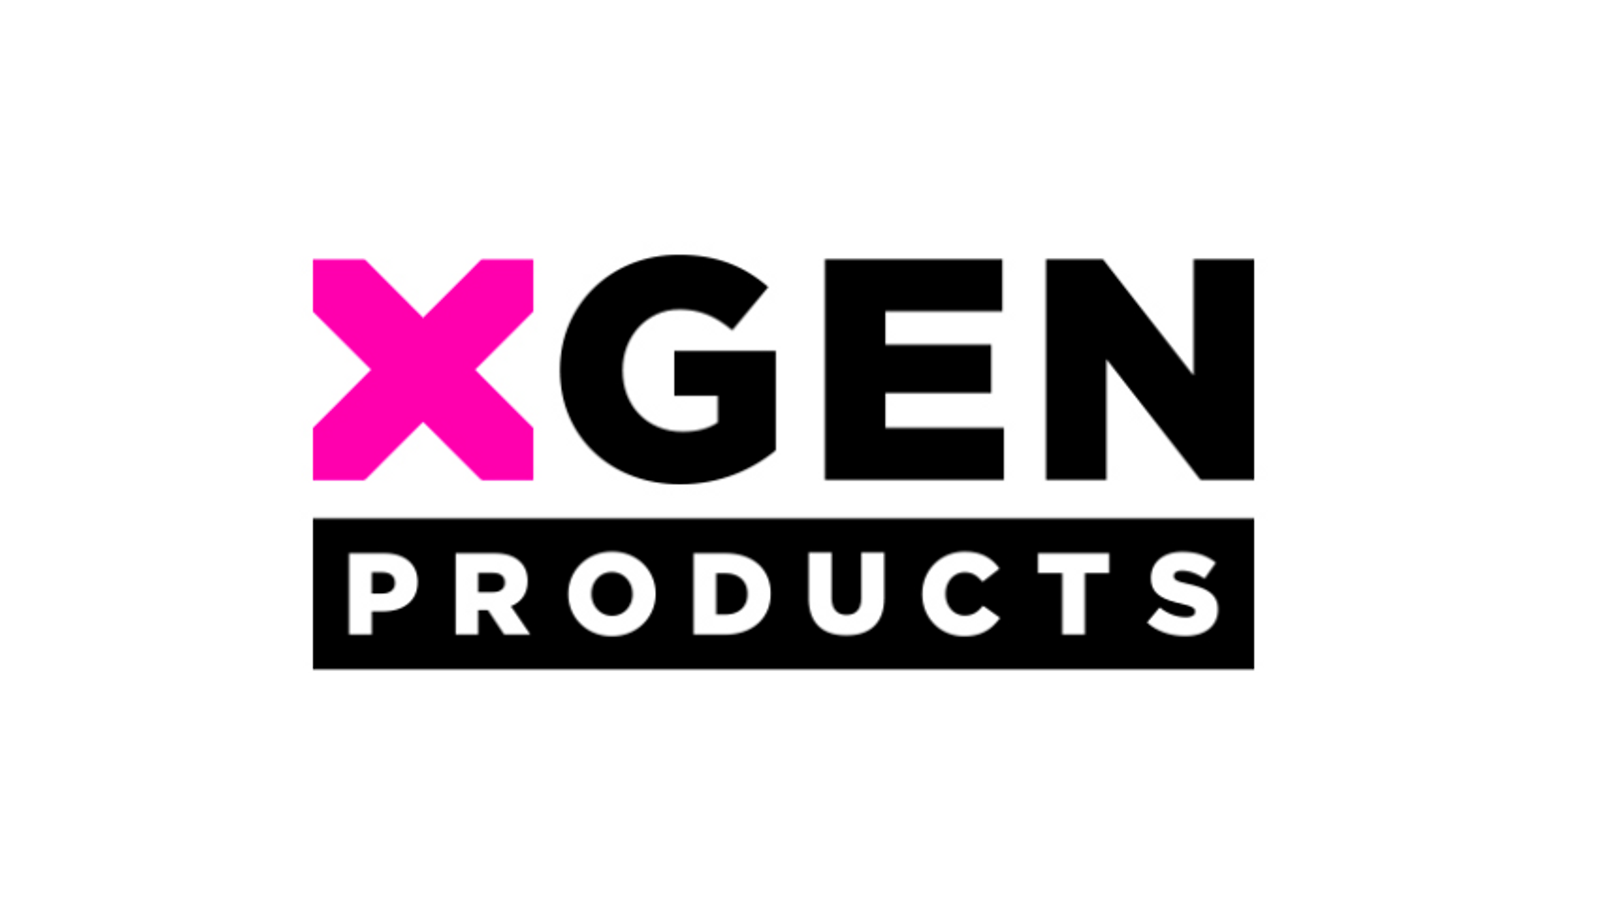 Xgen Reveals Winner of Holiday Amazon Gift Card Giveaway